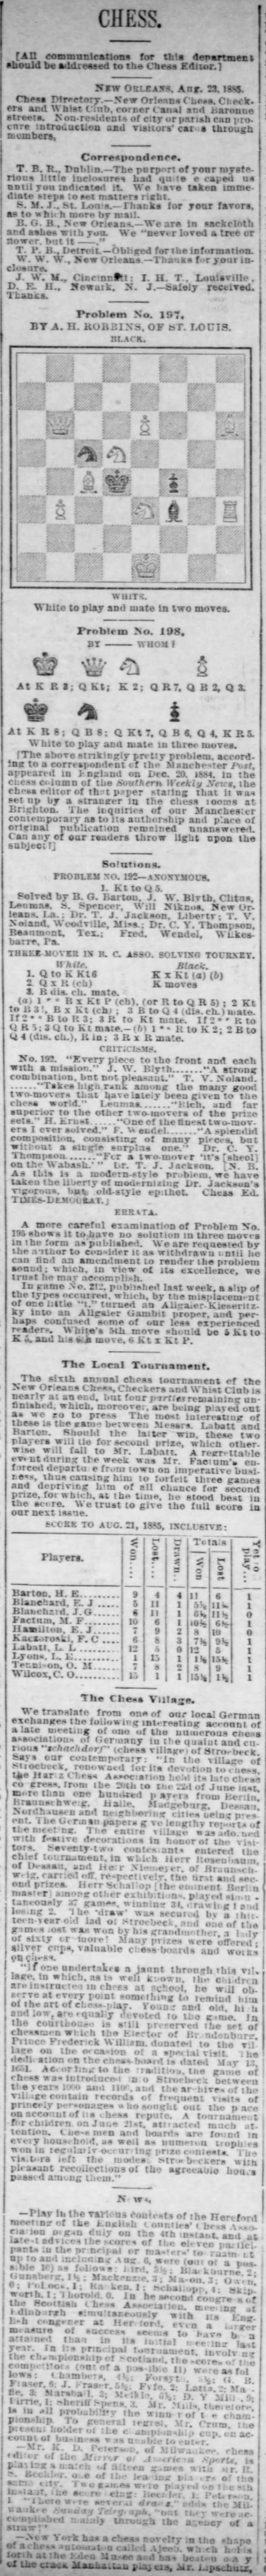 1885.08.29-01 New Orleans Weekly Times-Democrat.png